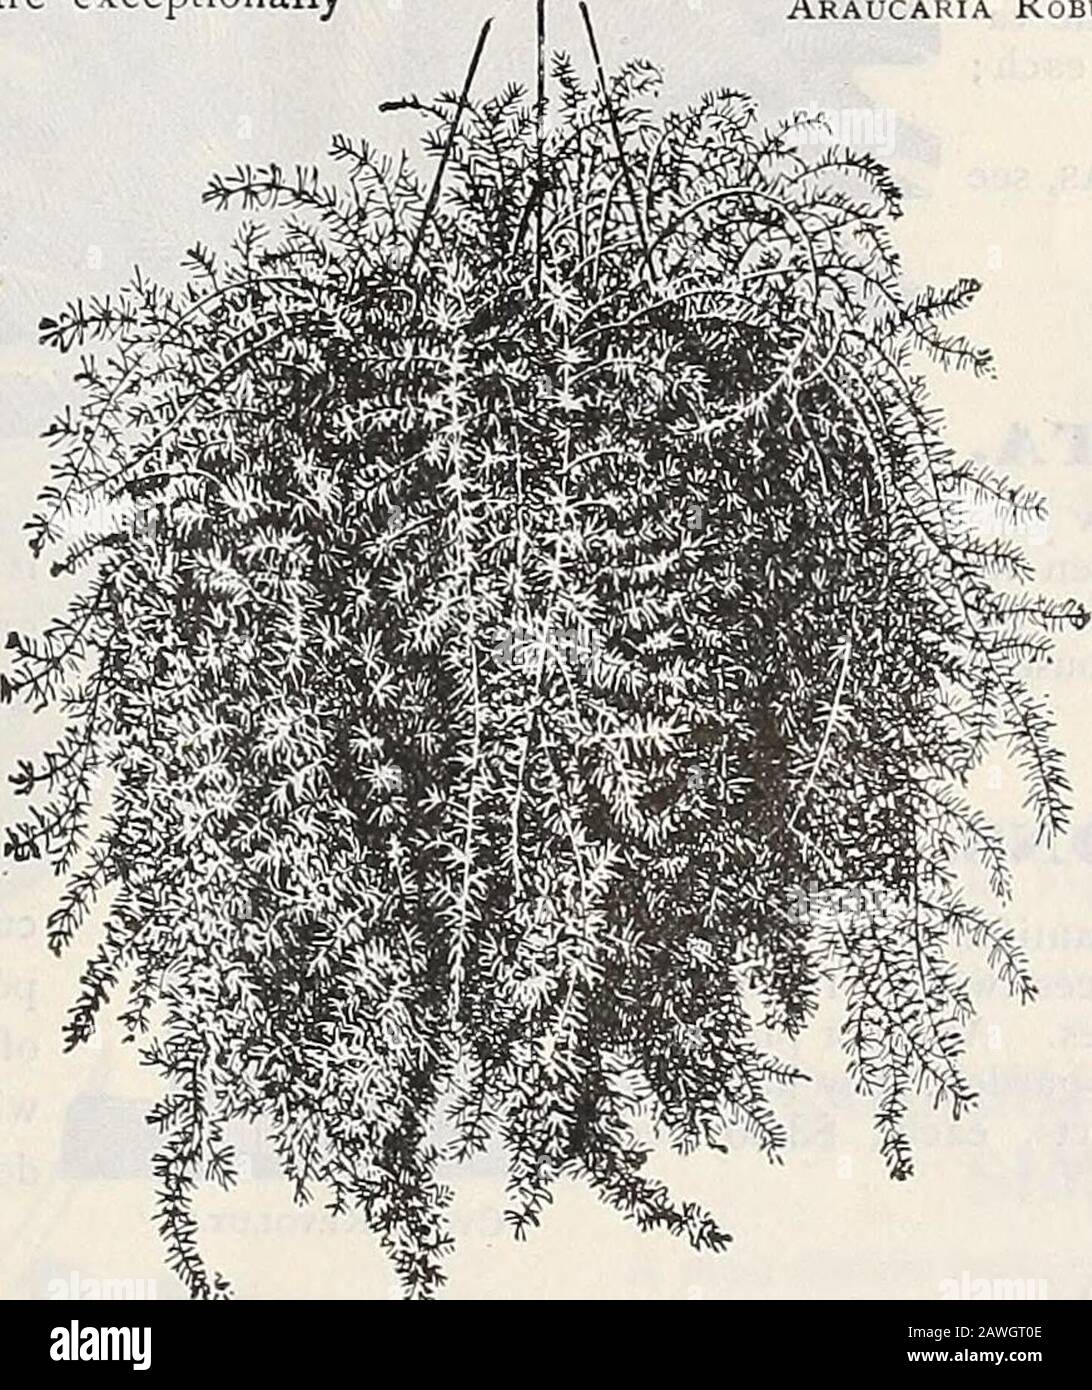 Dreer's autumn catalogue : 1899 bulbs plants, seeds, etc . Araucaria Robusta Compacta. Asparagus Sprengeri. A most de-sirable new species, es-pecially useful to grow asa pot plant for decorativepurposes or for plantingin suspended baskets ; thefronds are frequently fourfeet long, are of a richshade of green and mostuseful for cutting, retain-ing their freshness afterbeing cut for weeks. Itwill make an excellenthouse plant, as it with-stands dry atmosphere andwill succeed in almostany position. We con-sider this one of the besthouse plants introducedfor many years. (Seecut.) 25 cts. each ; $2.5 Stock Photo